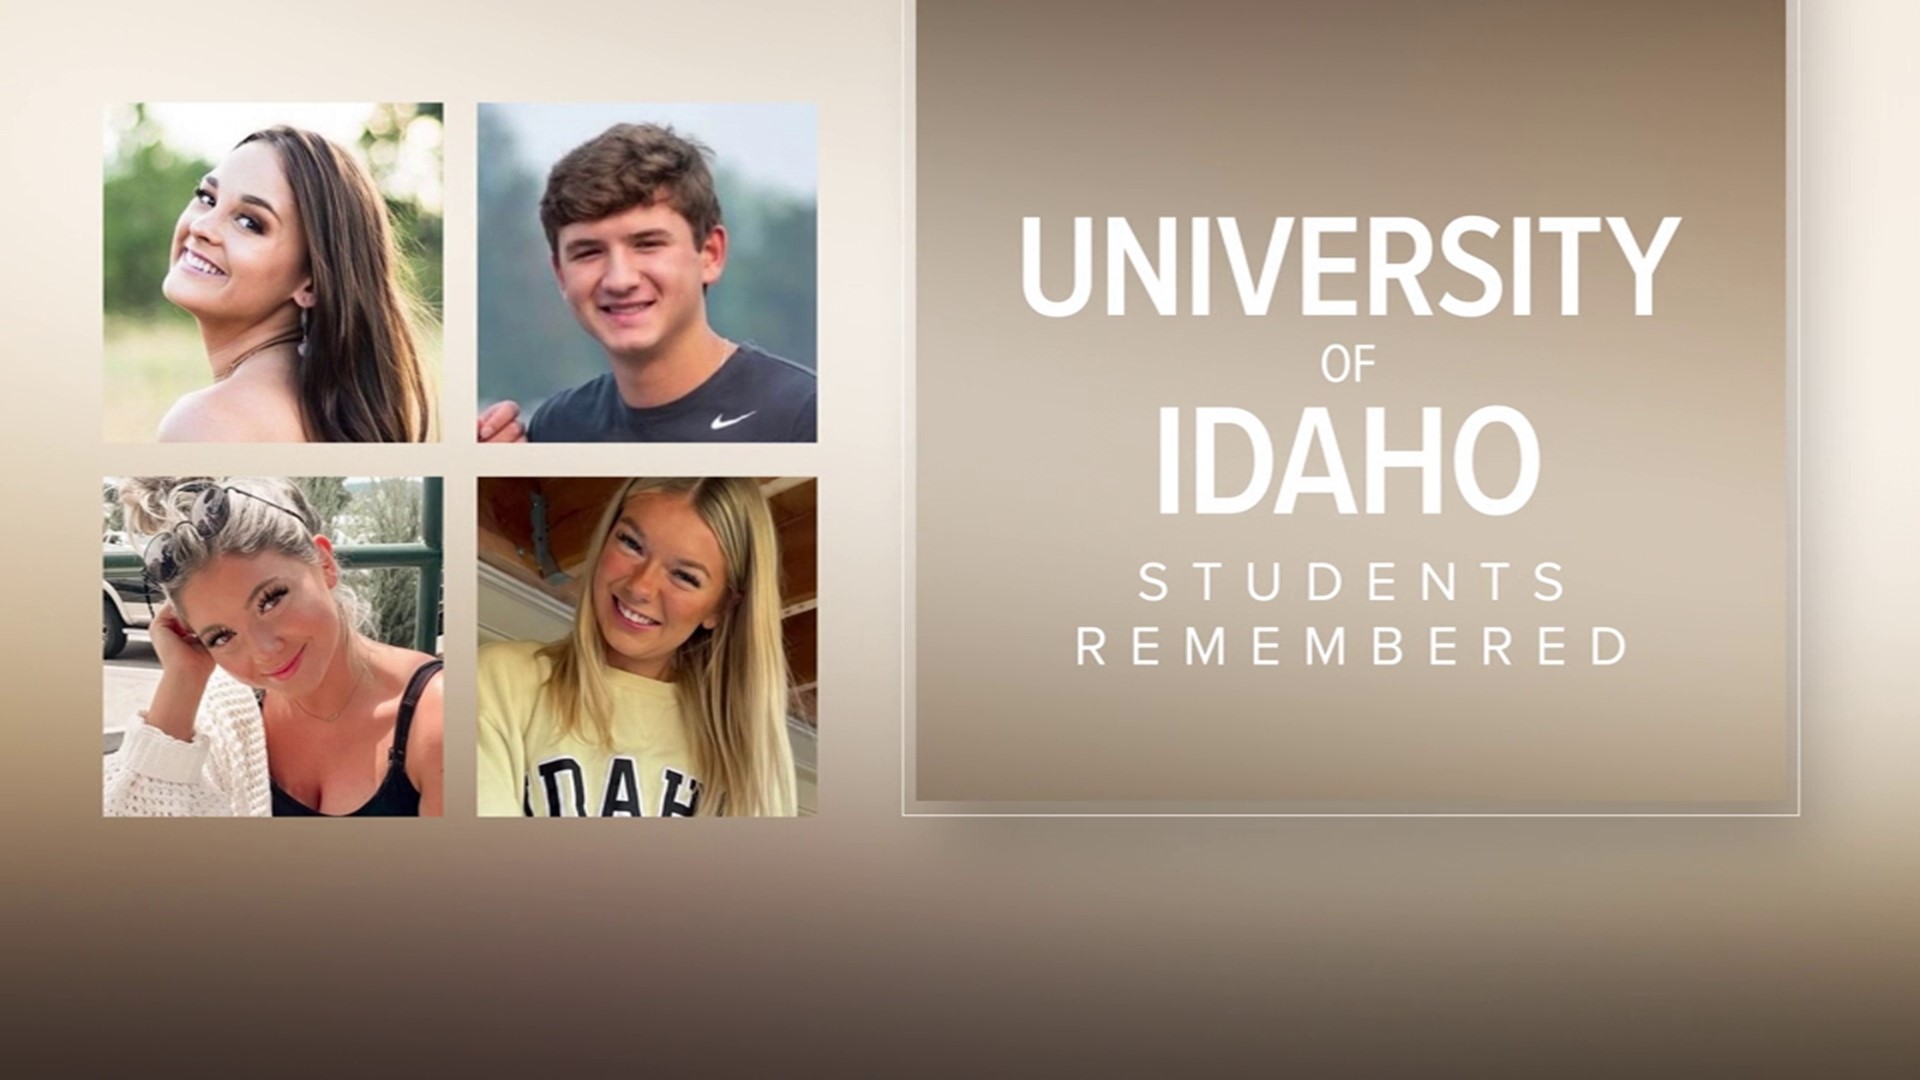 The Moscow community is coming together to honor the four University of Idaho students killed in a home near campus over two weeks ago.